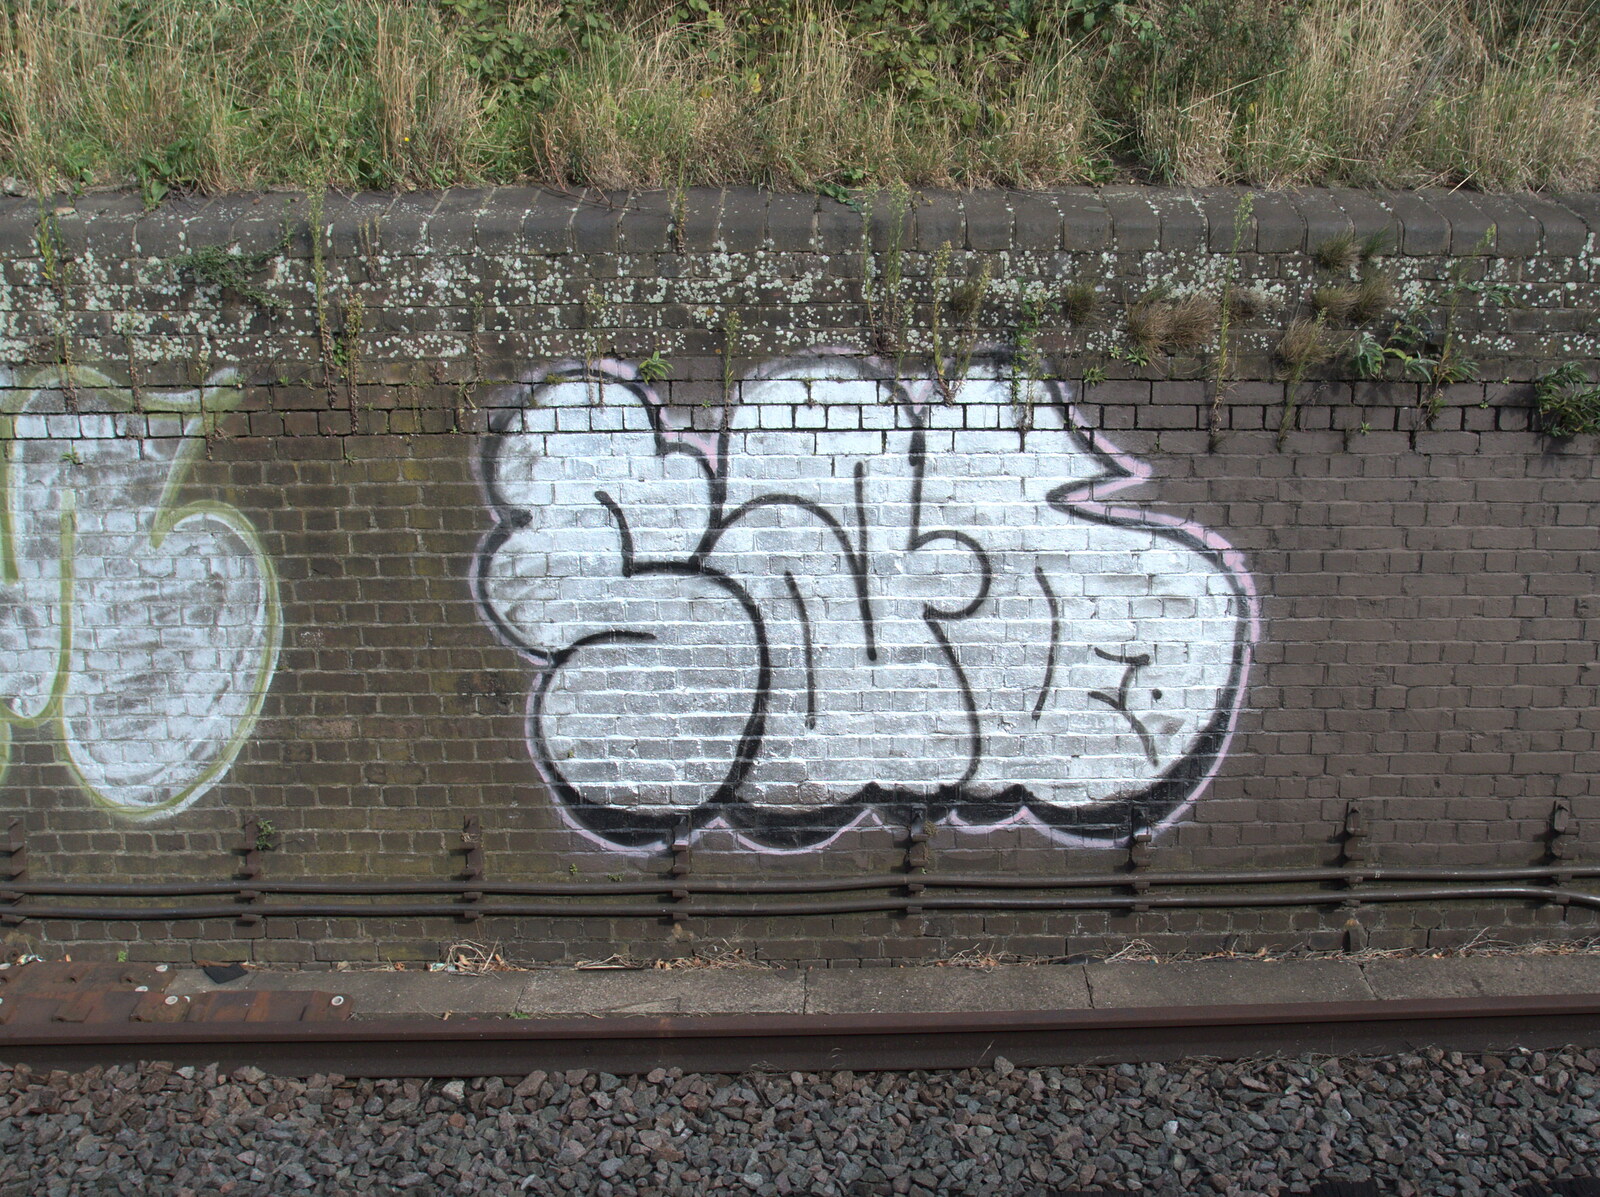 Silver graffiti tags from New Railway and a Trip to Ikea, Ipswich and Thurrock - 19th September 2014